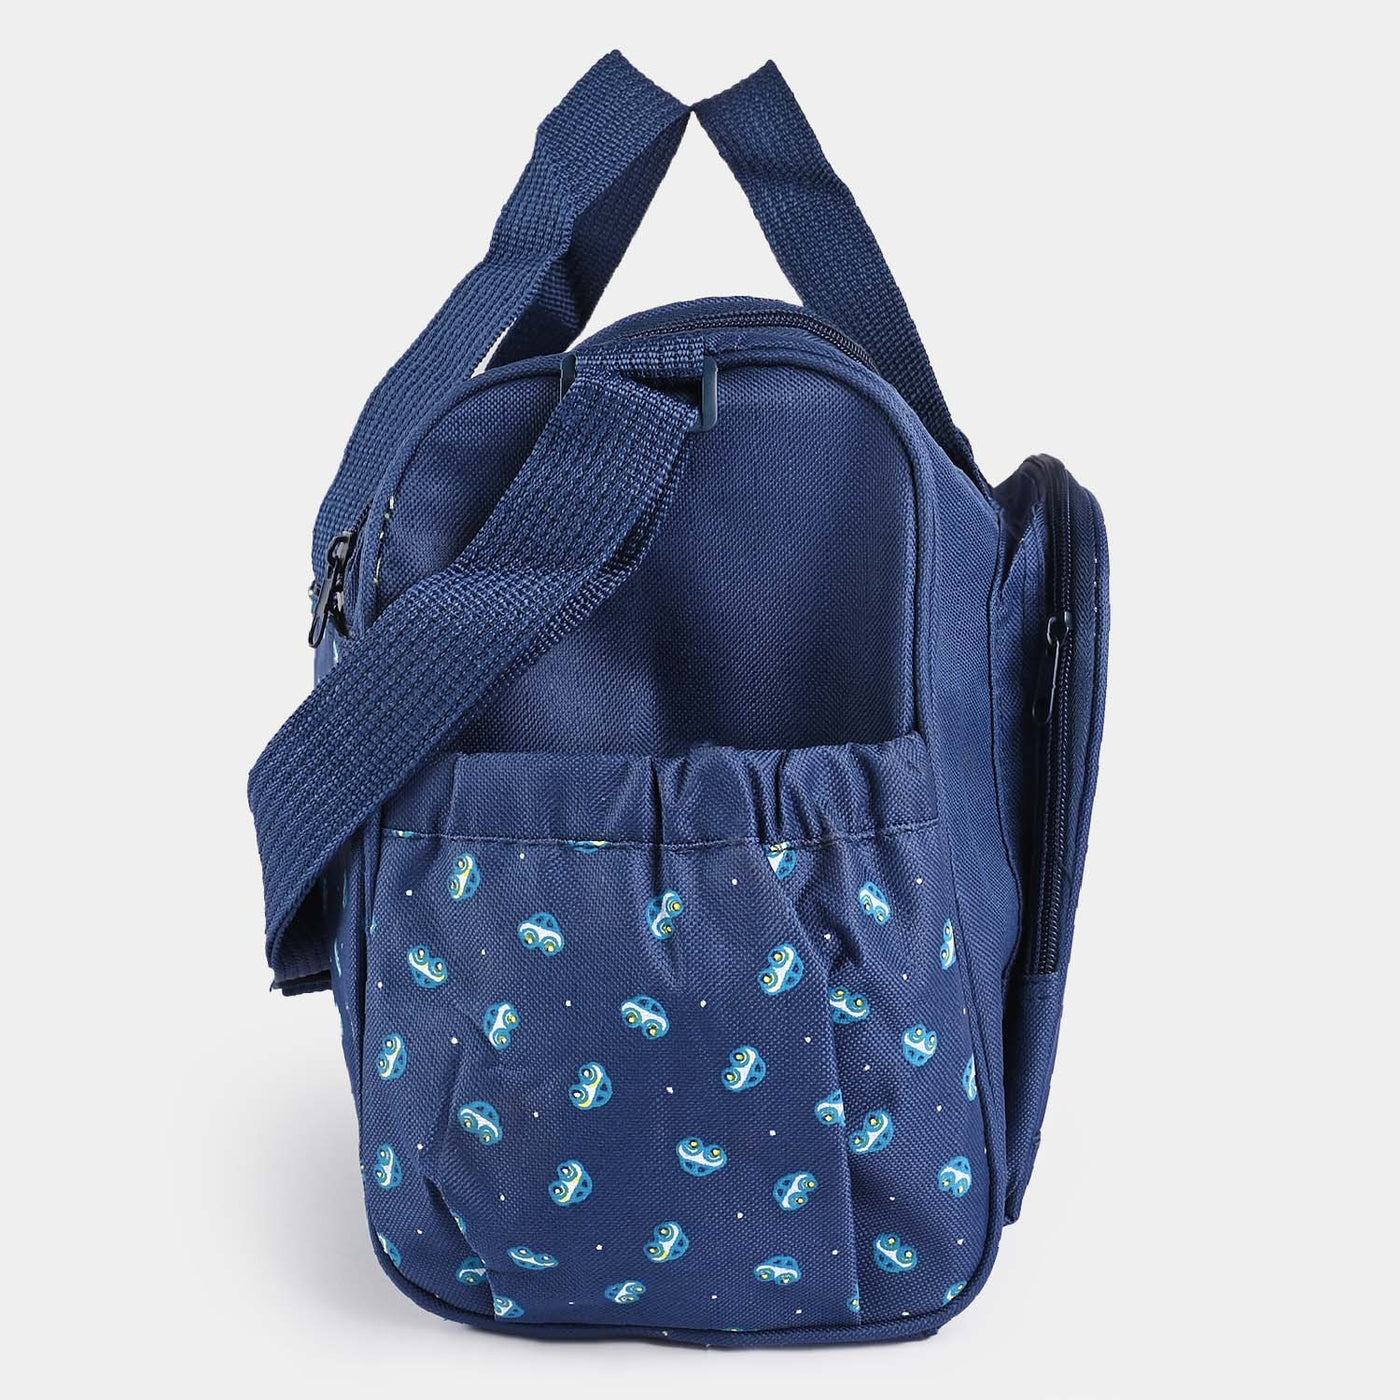 MOTHER TRAVEL LARGE BABY DIAPER BAG